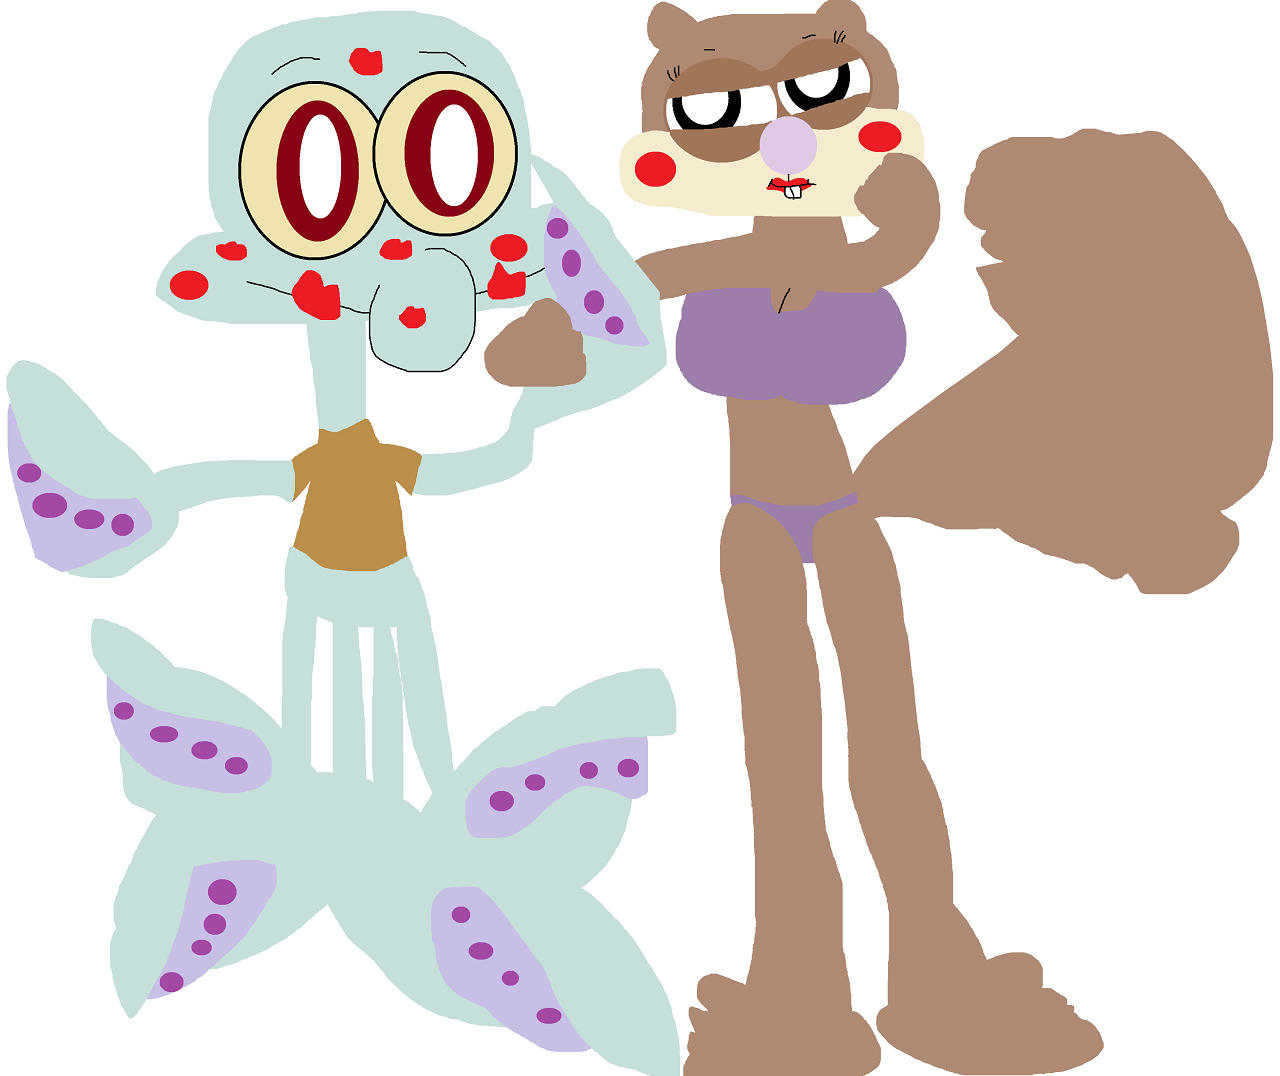 Sandy Covered Squidward With Kisses by Falconlobo